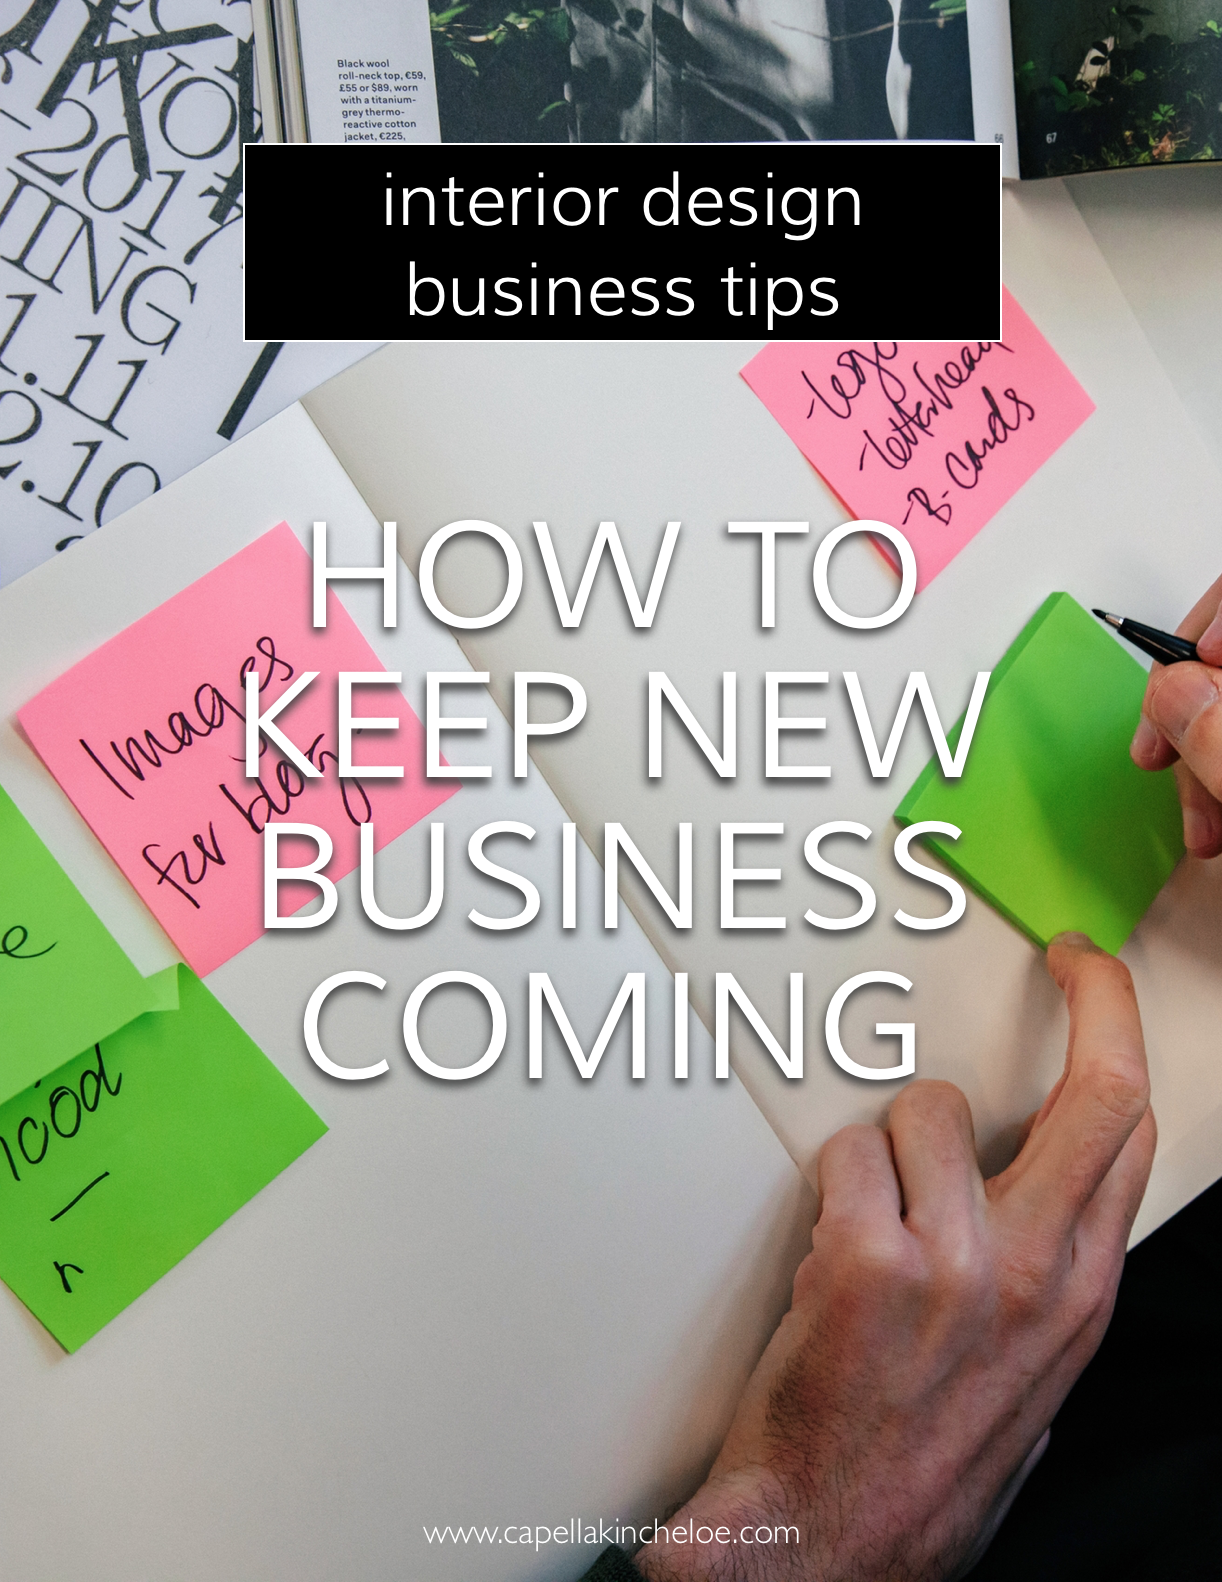 How to Keep New Business Coming